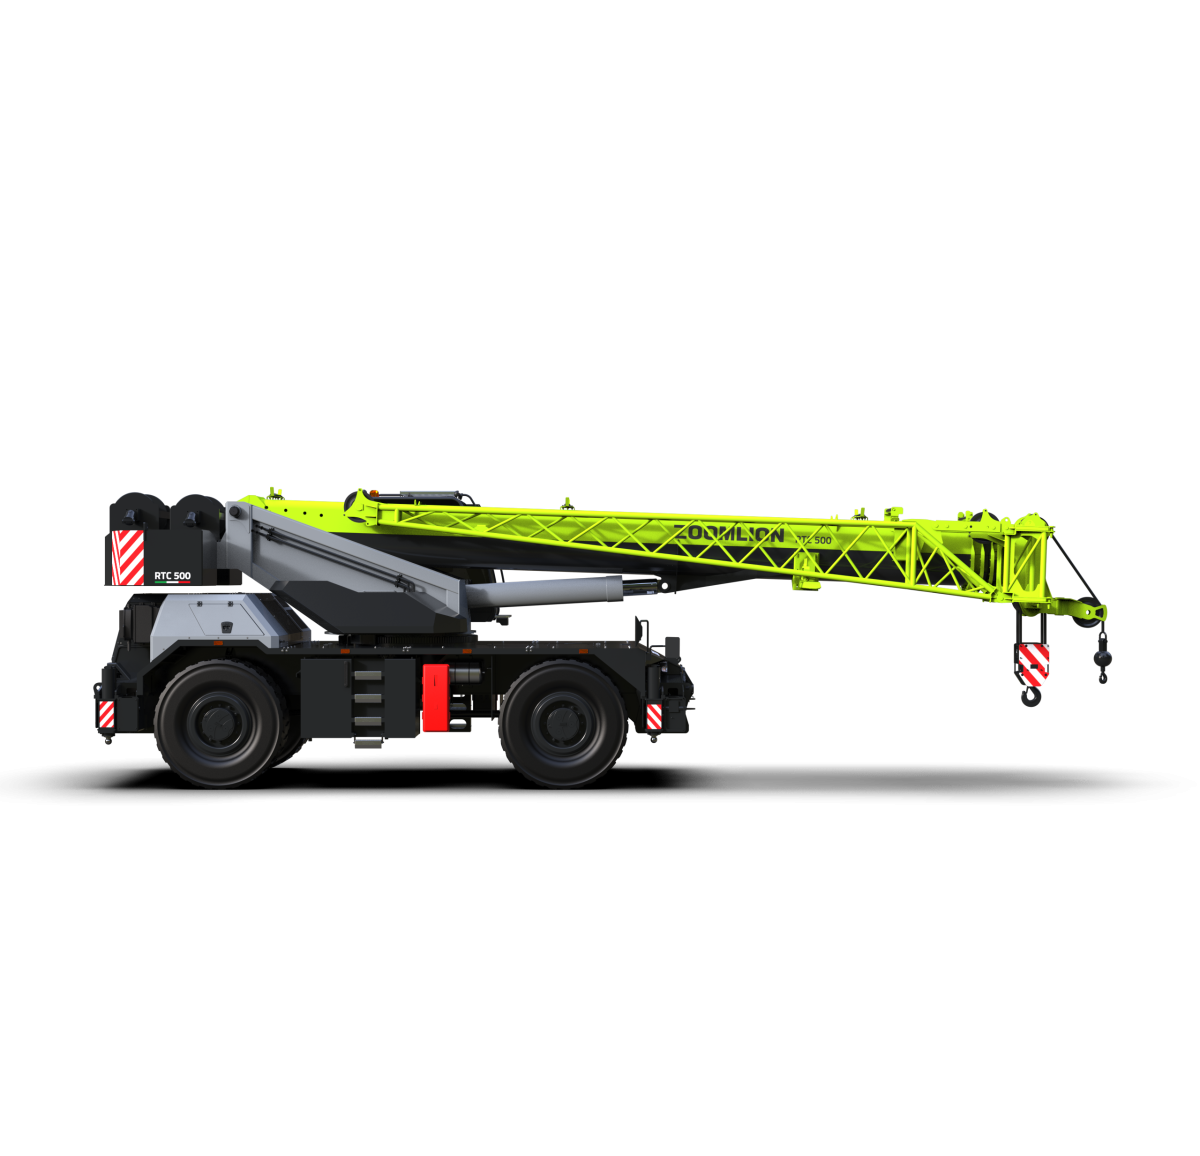 /storage/2023/05/zoomlion-exhibited-the-rtc-500-rough-terrain-crane-at-samoter-2023_645f4e870b4a6.png